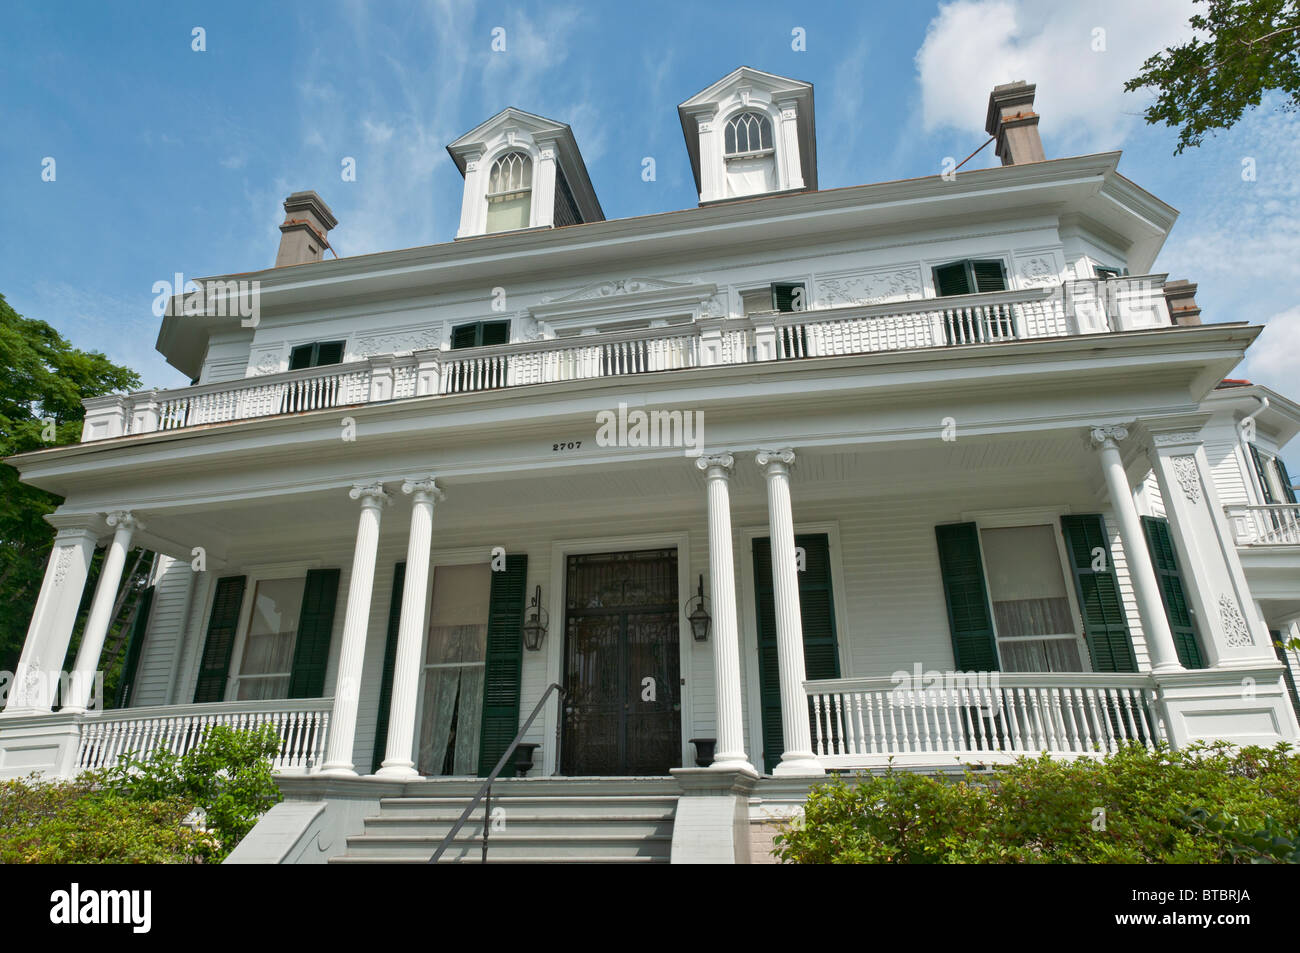 Louisiana, New Orleans, Garden District, private residence at 2707 Coliseum Street, movie location for film 'Benjamin Button' Stock Photo